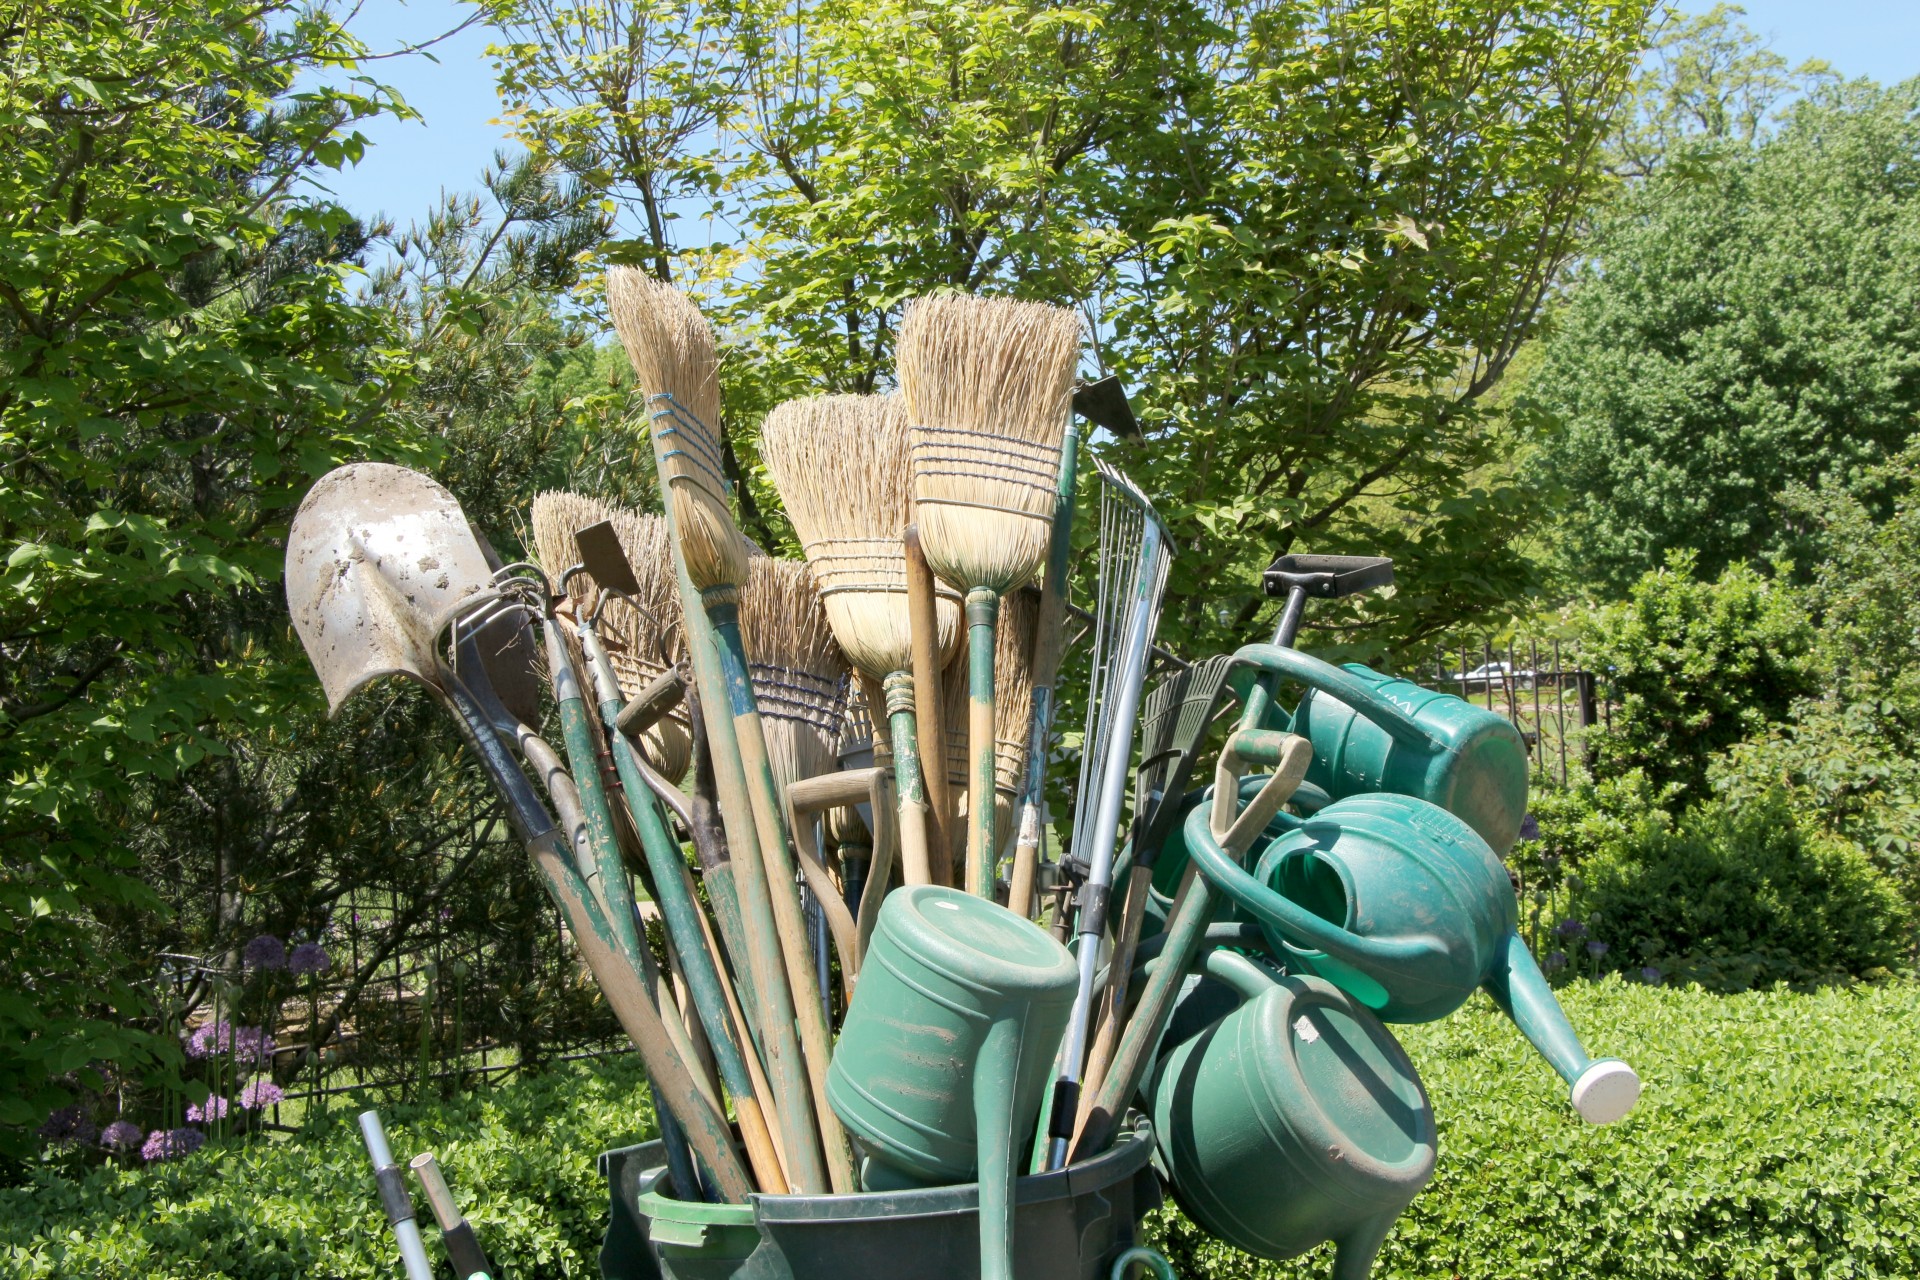 Cart loaded with gardening tools